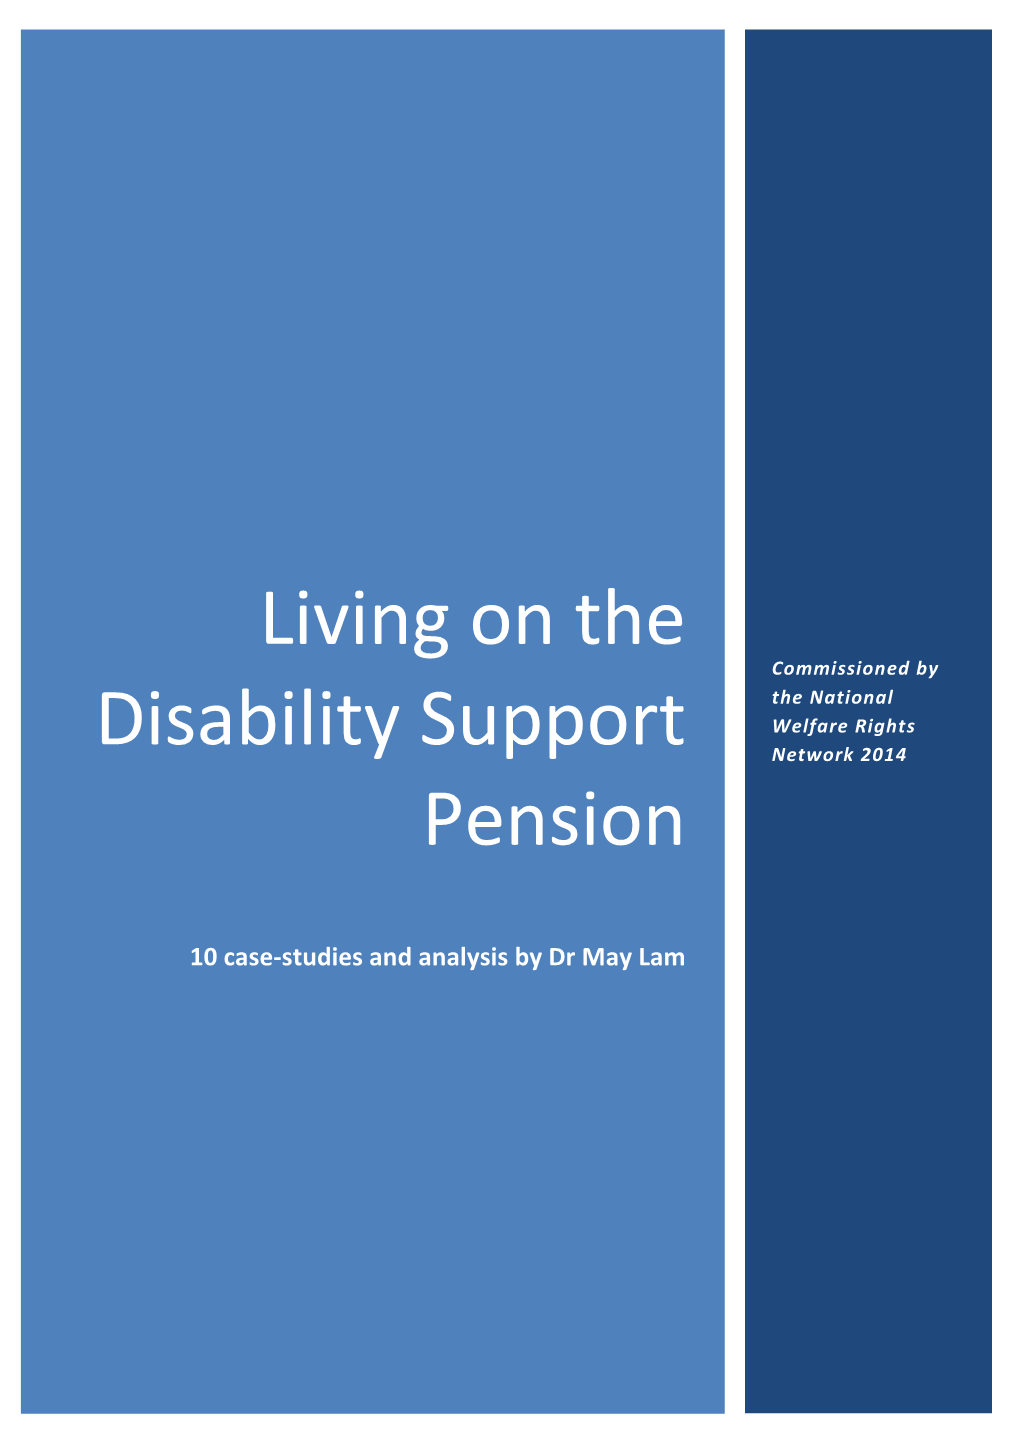 Living on the Disability Support Pension: 10 Case Studies and Analysis, Published by the National Welfare Rights Network, 2014